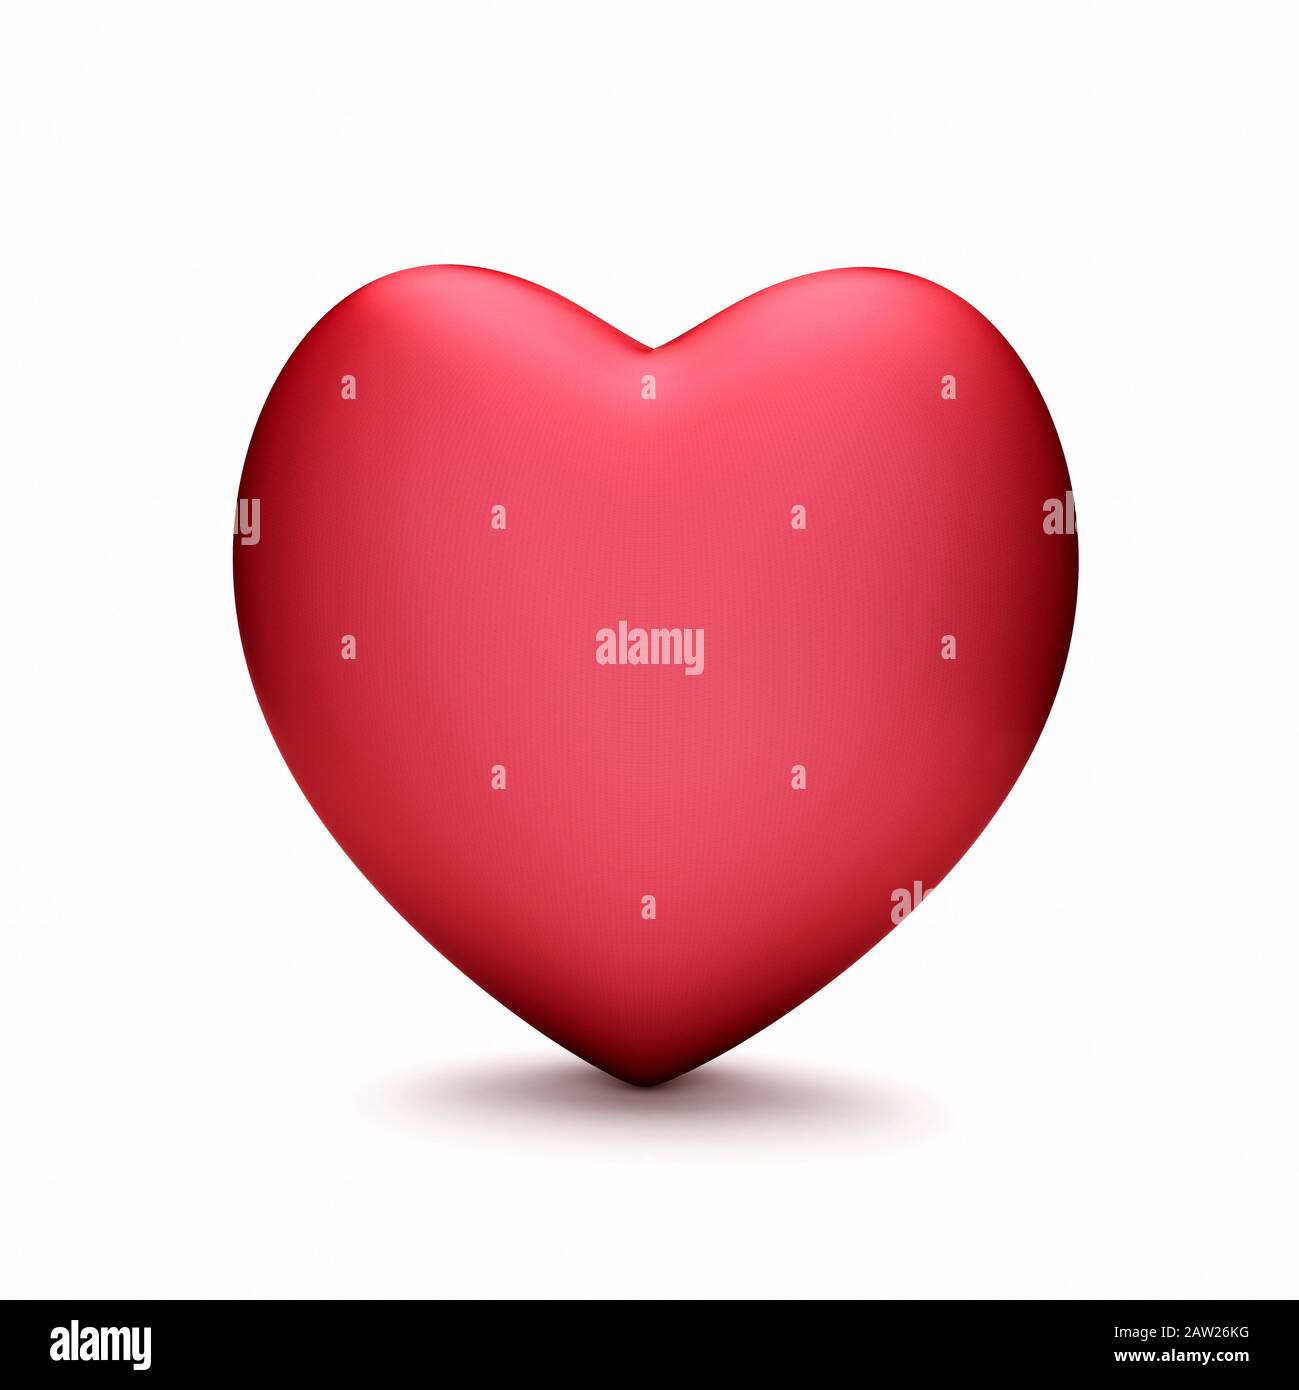 Solid red heart on a white background Stock Photo